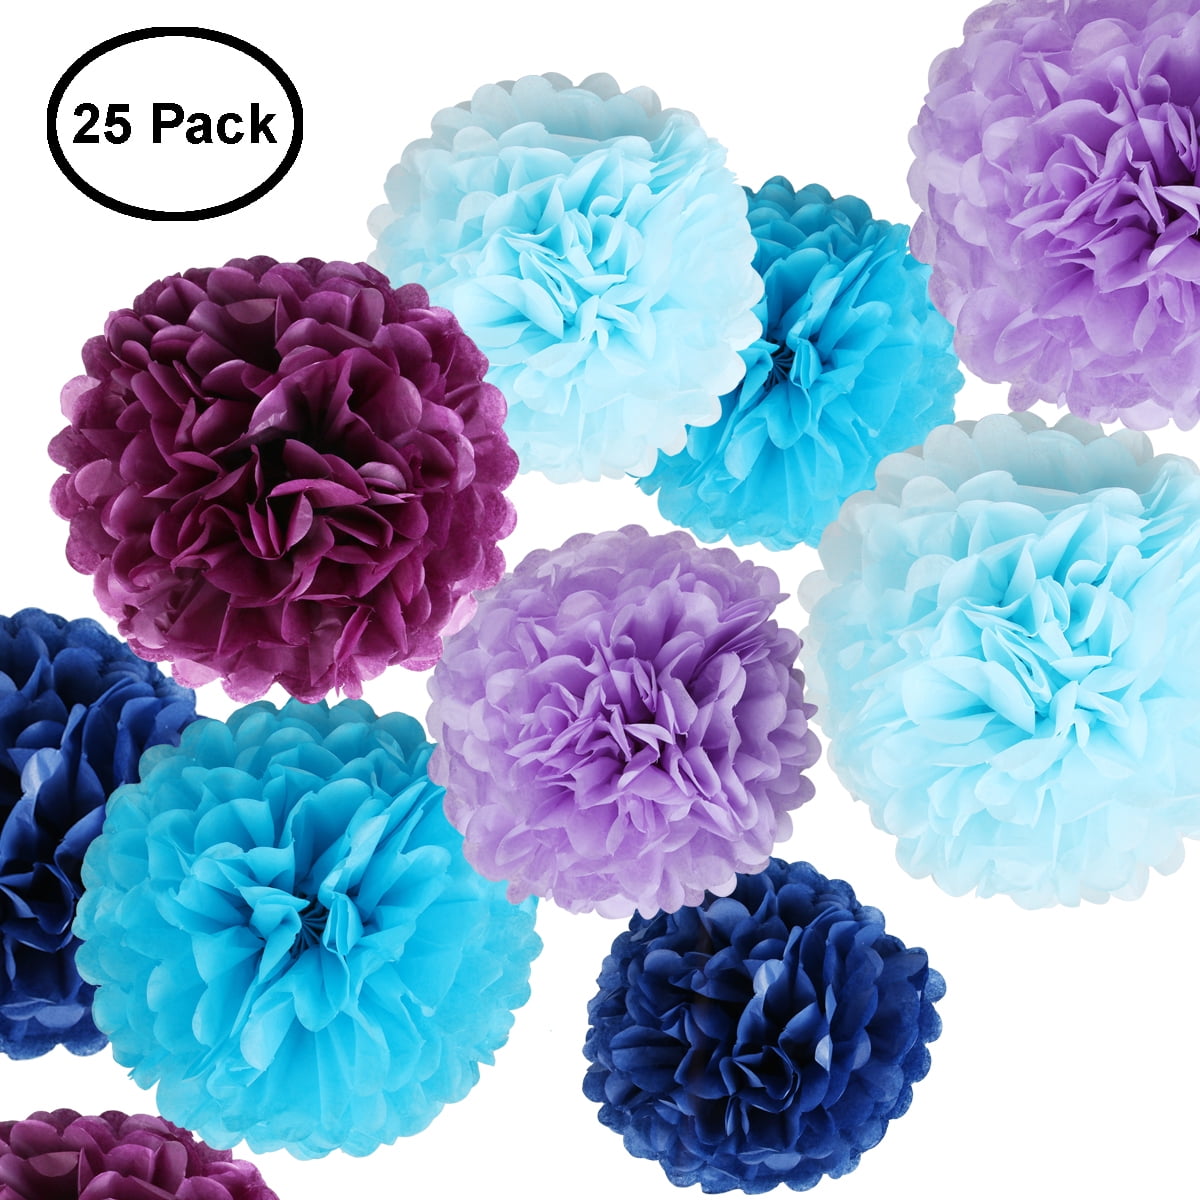 Super-Fun Pink And Gold Party Su 18 Pom Pom Pack Tissue Paper Pom Poms Flowers 